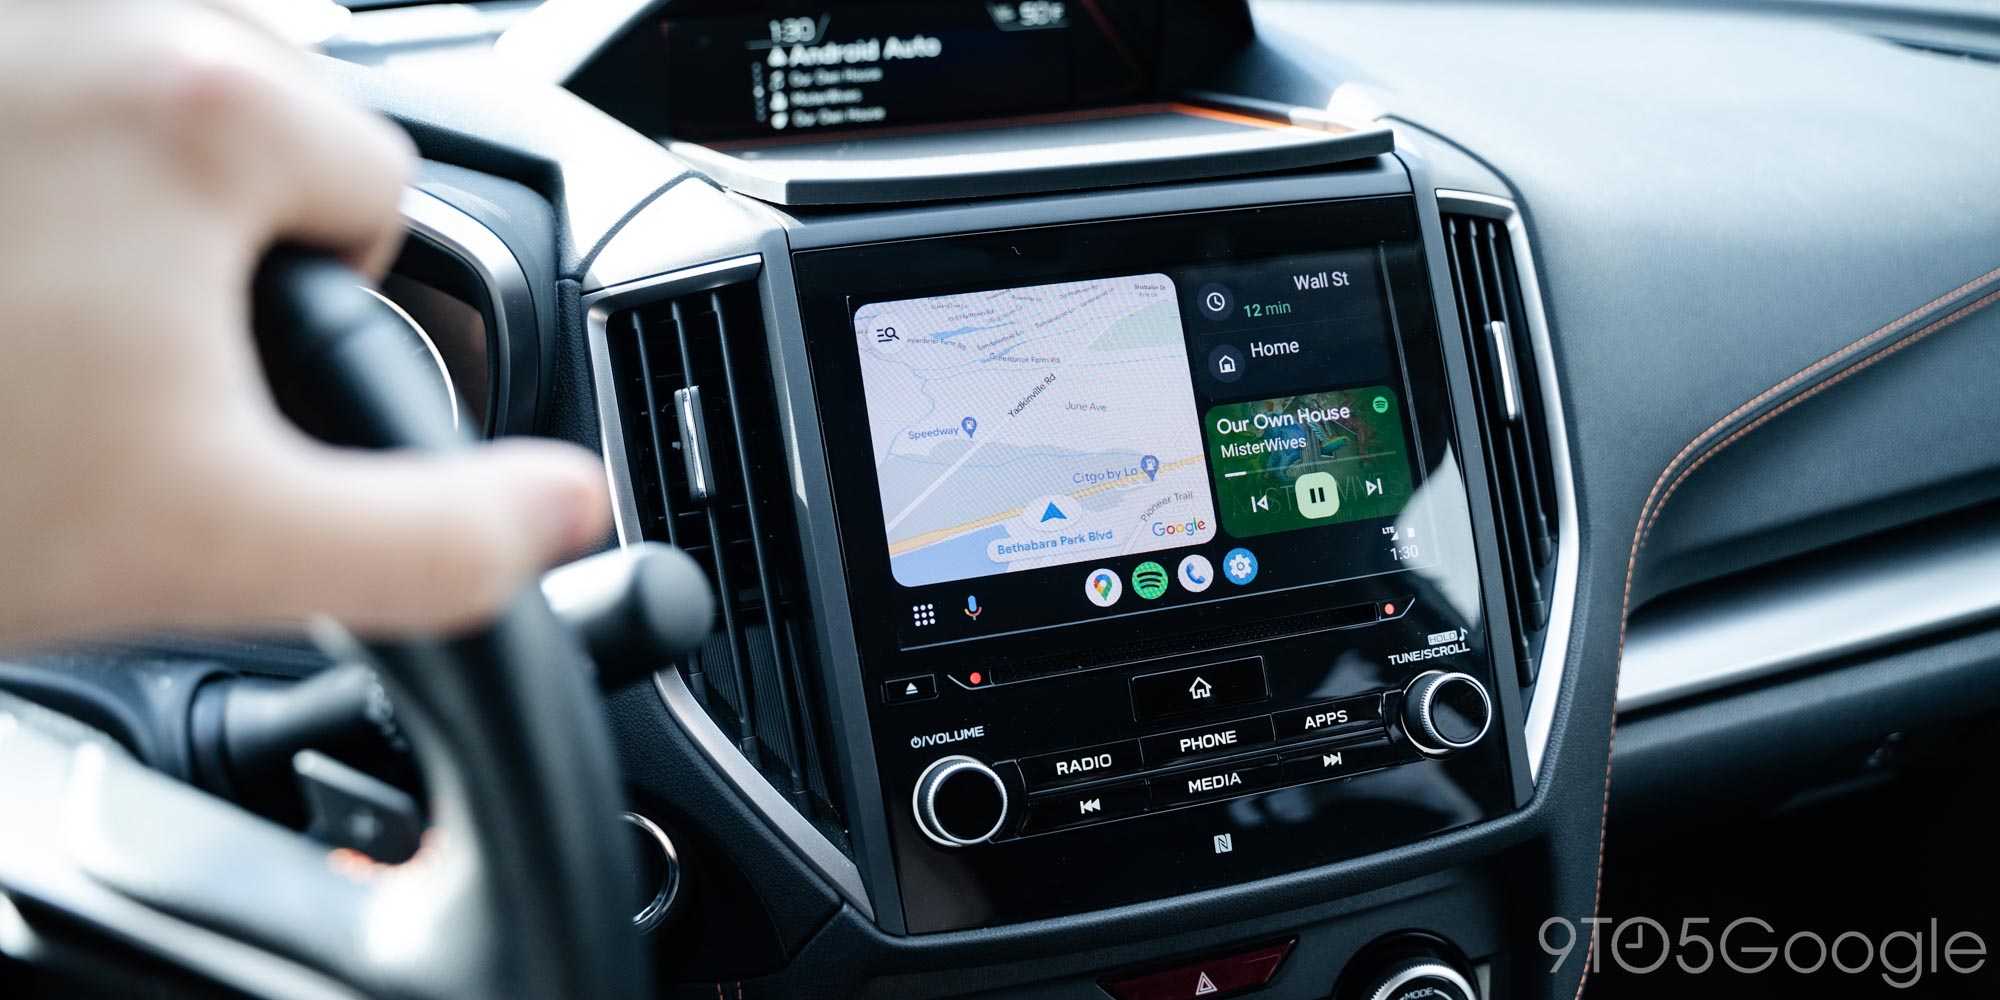 Hit the road with Android Auto's new look